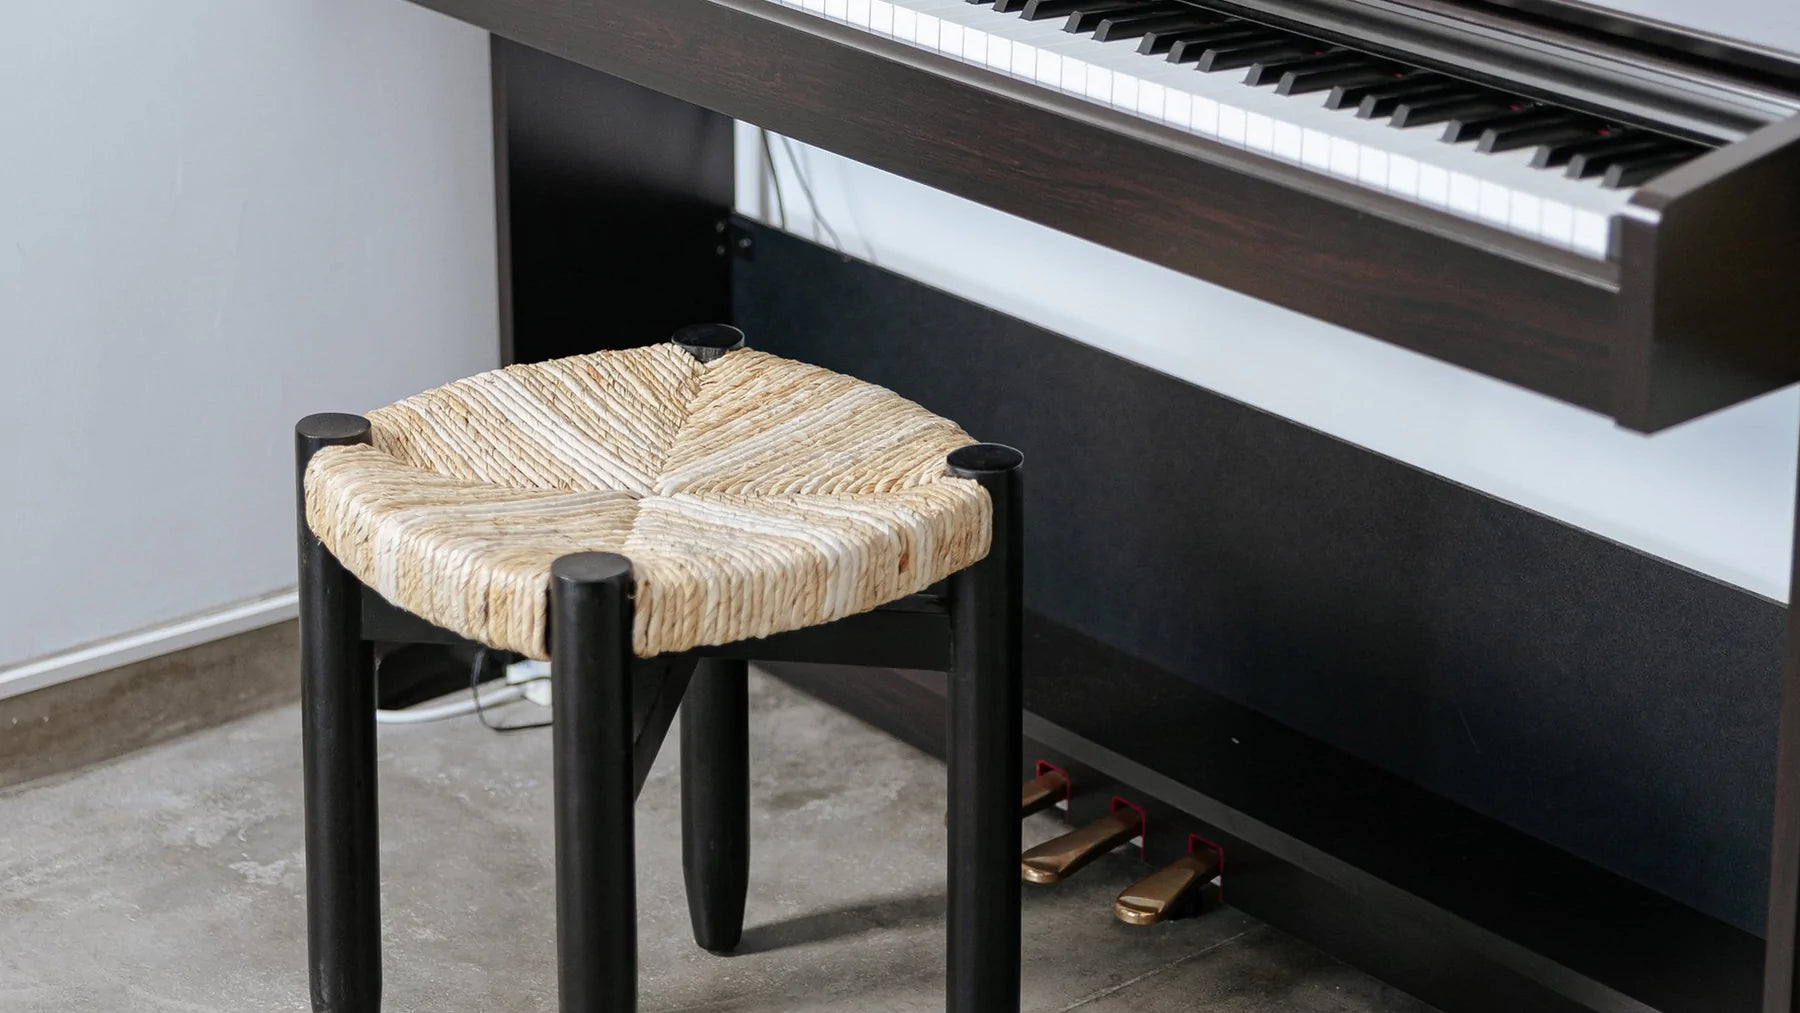 F&S Exclusives: Stools